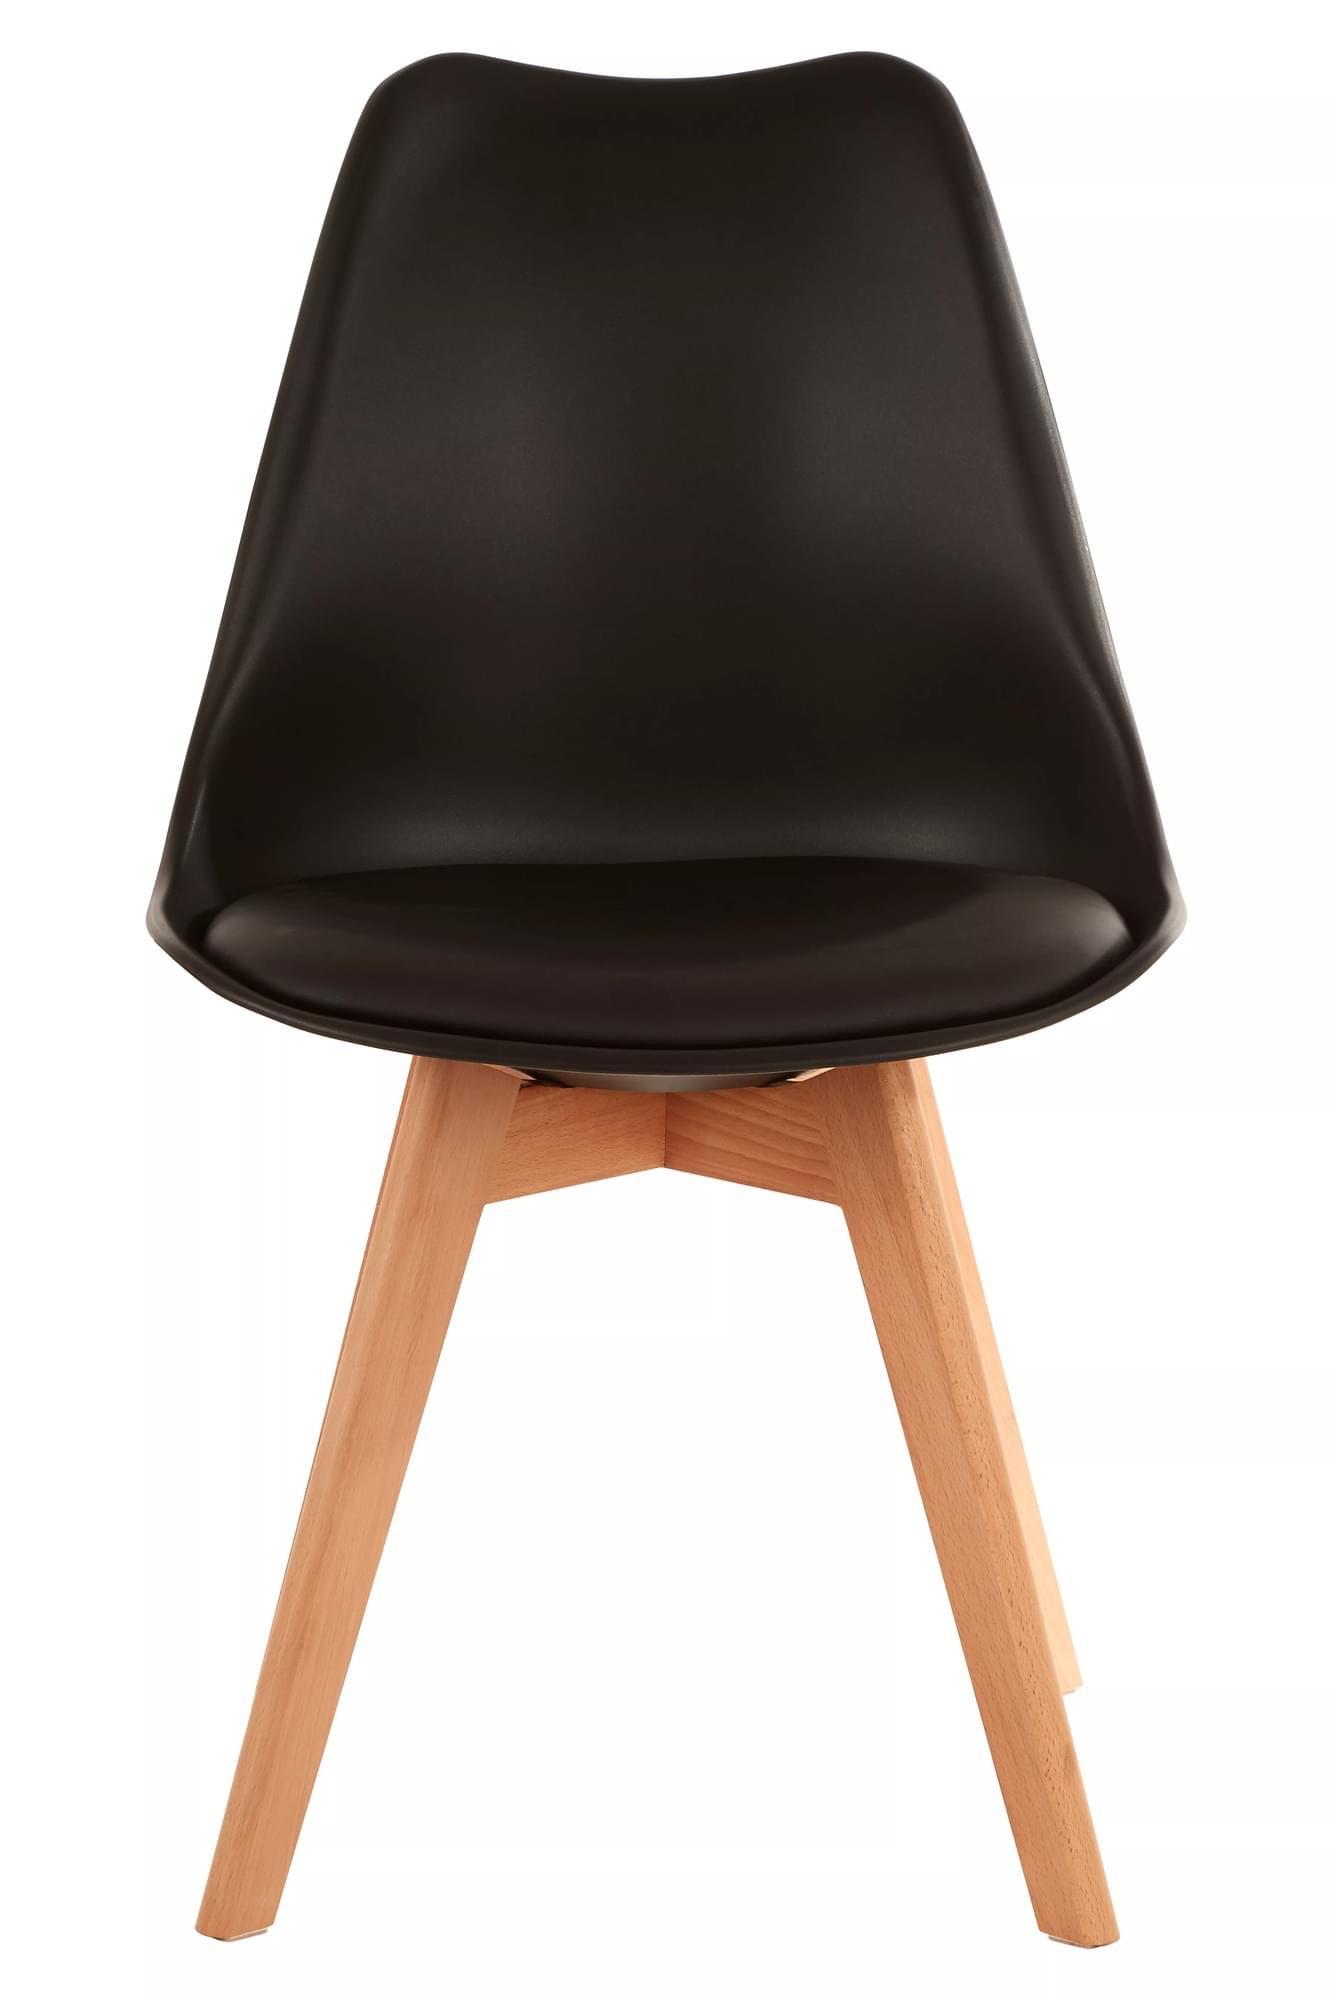 Interiors by Premier Stockholm Black Chair With Cushion And Beech Wood Legs